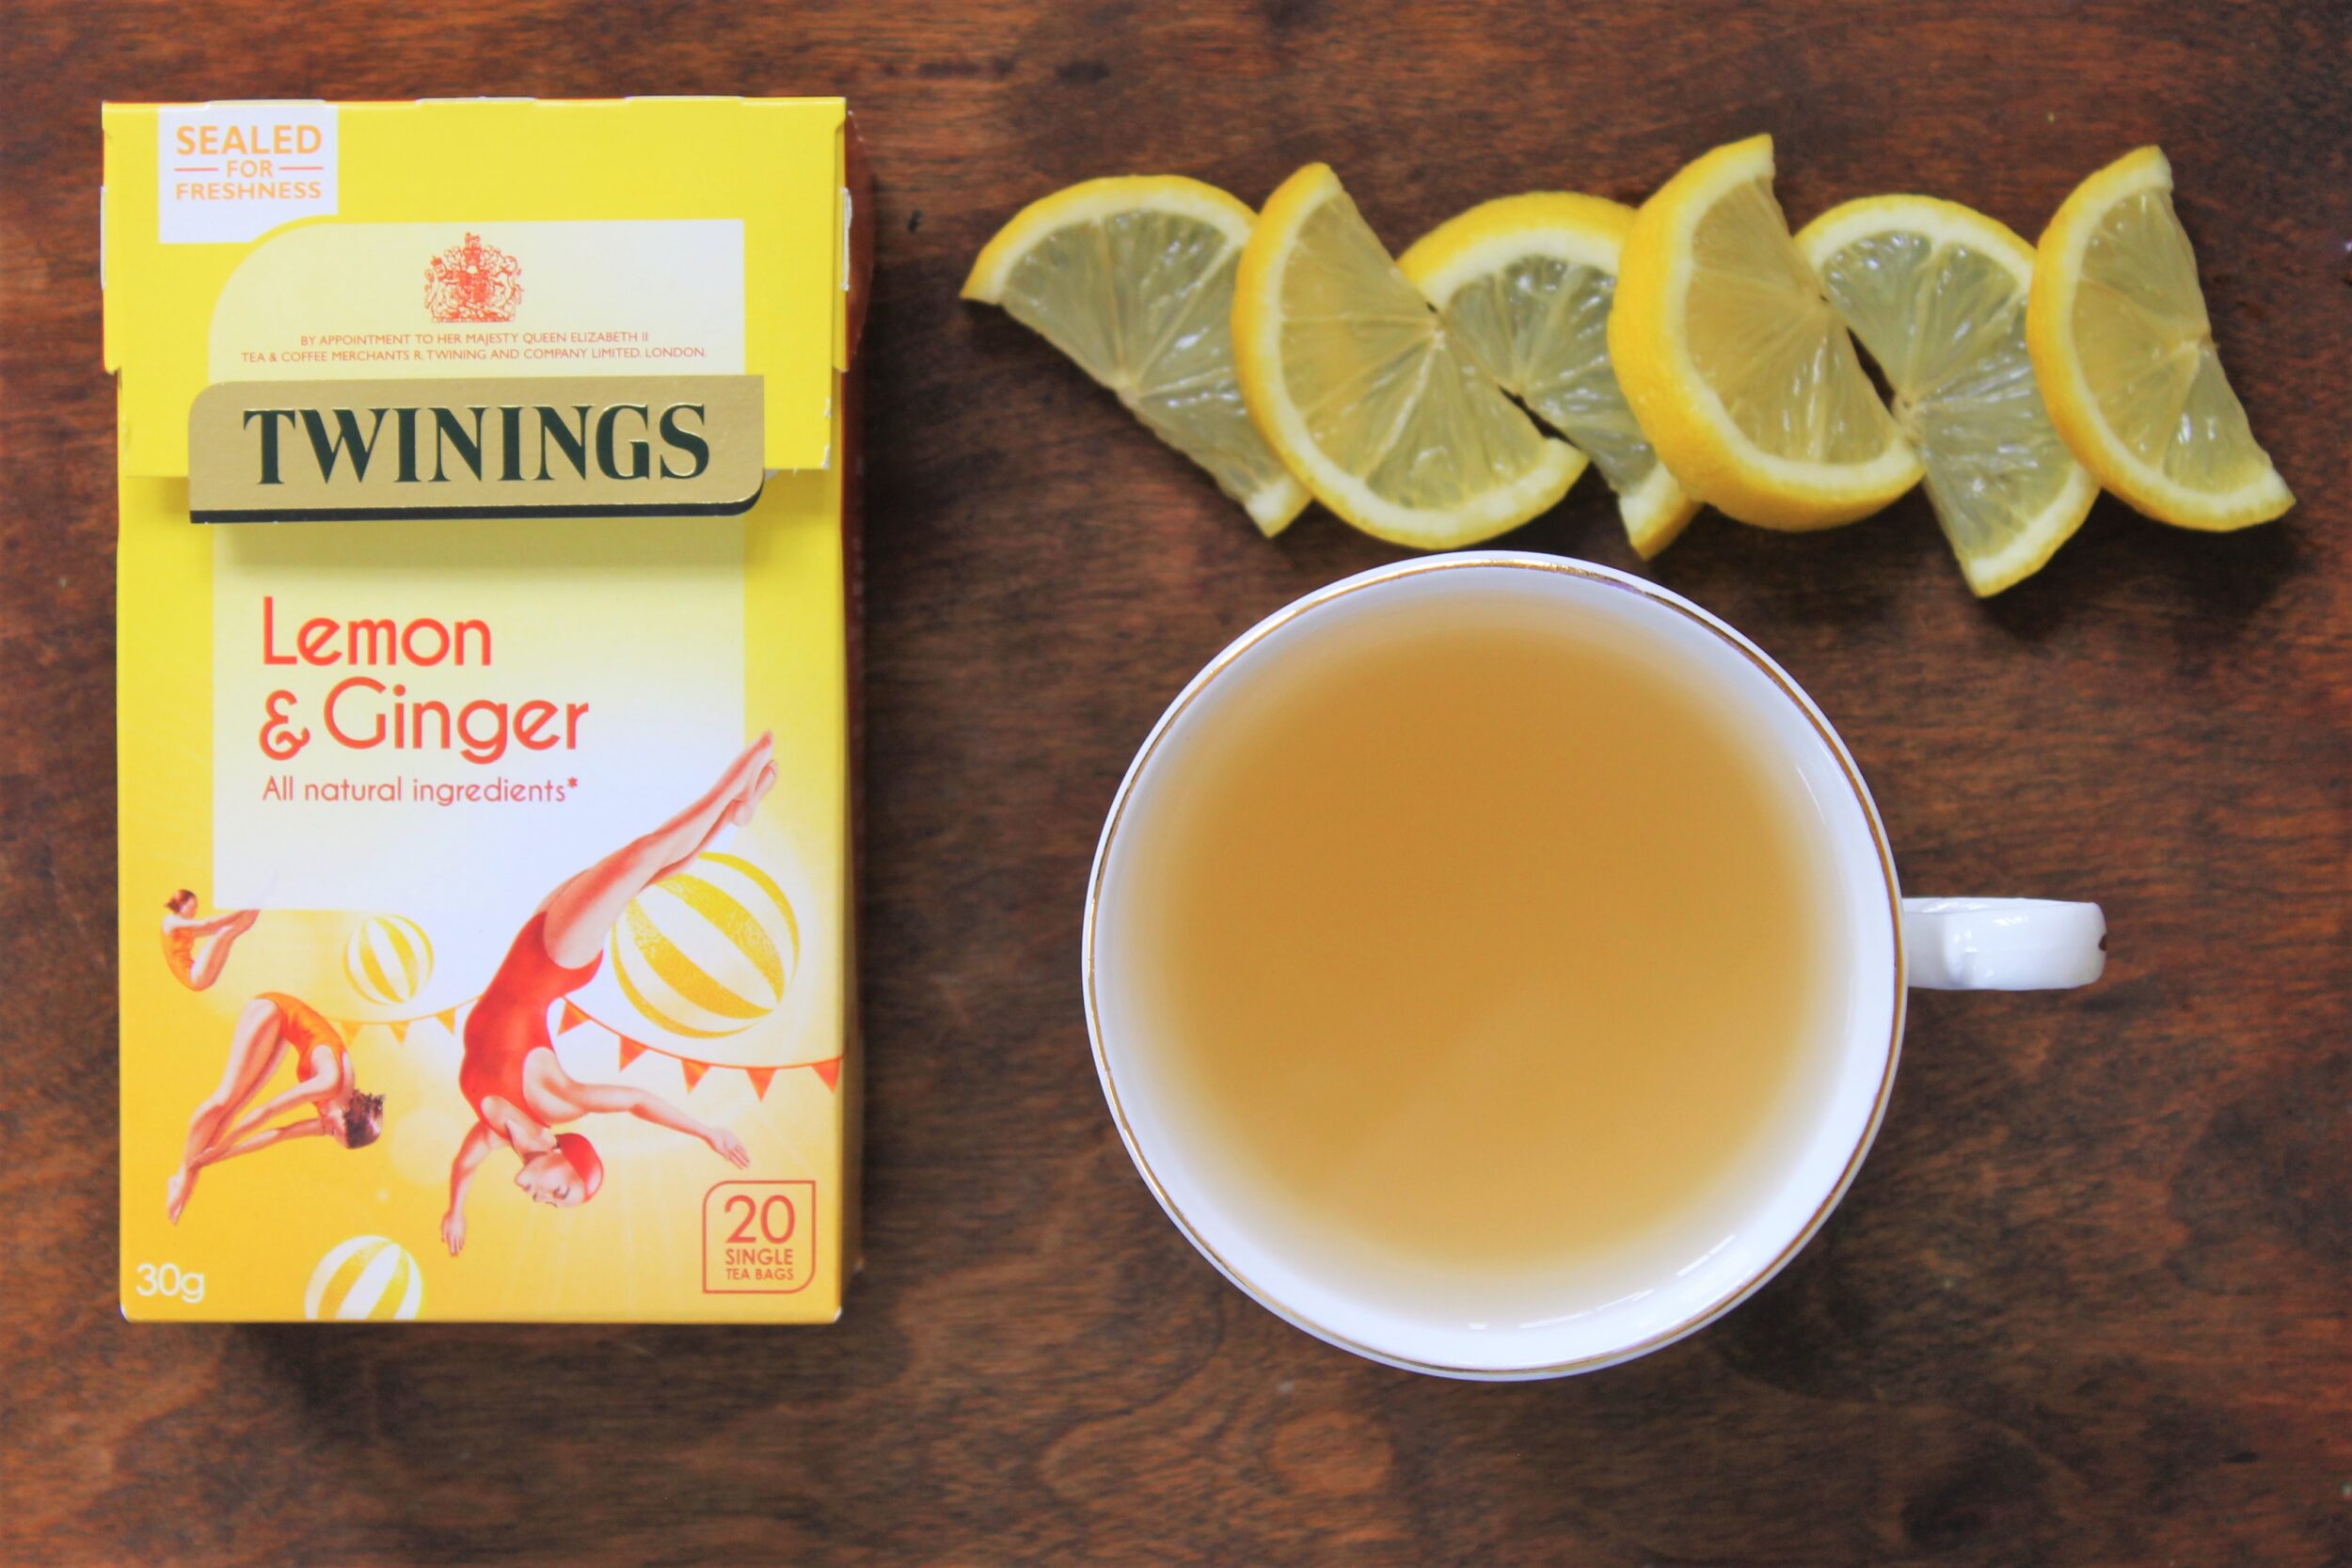 Share more than 65 twinings ginger tea bags - in.duhocakina